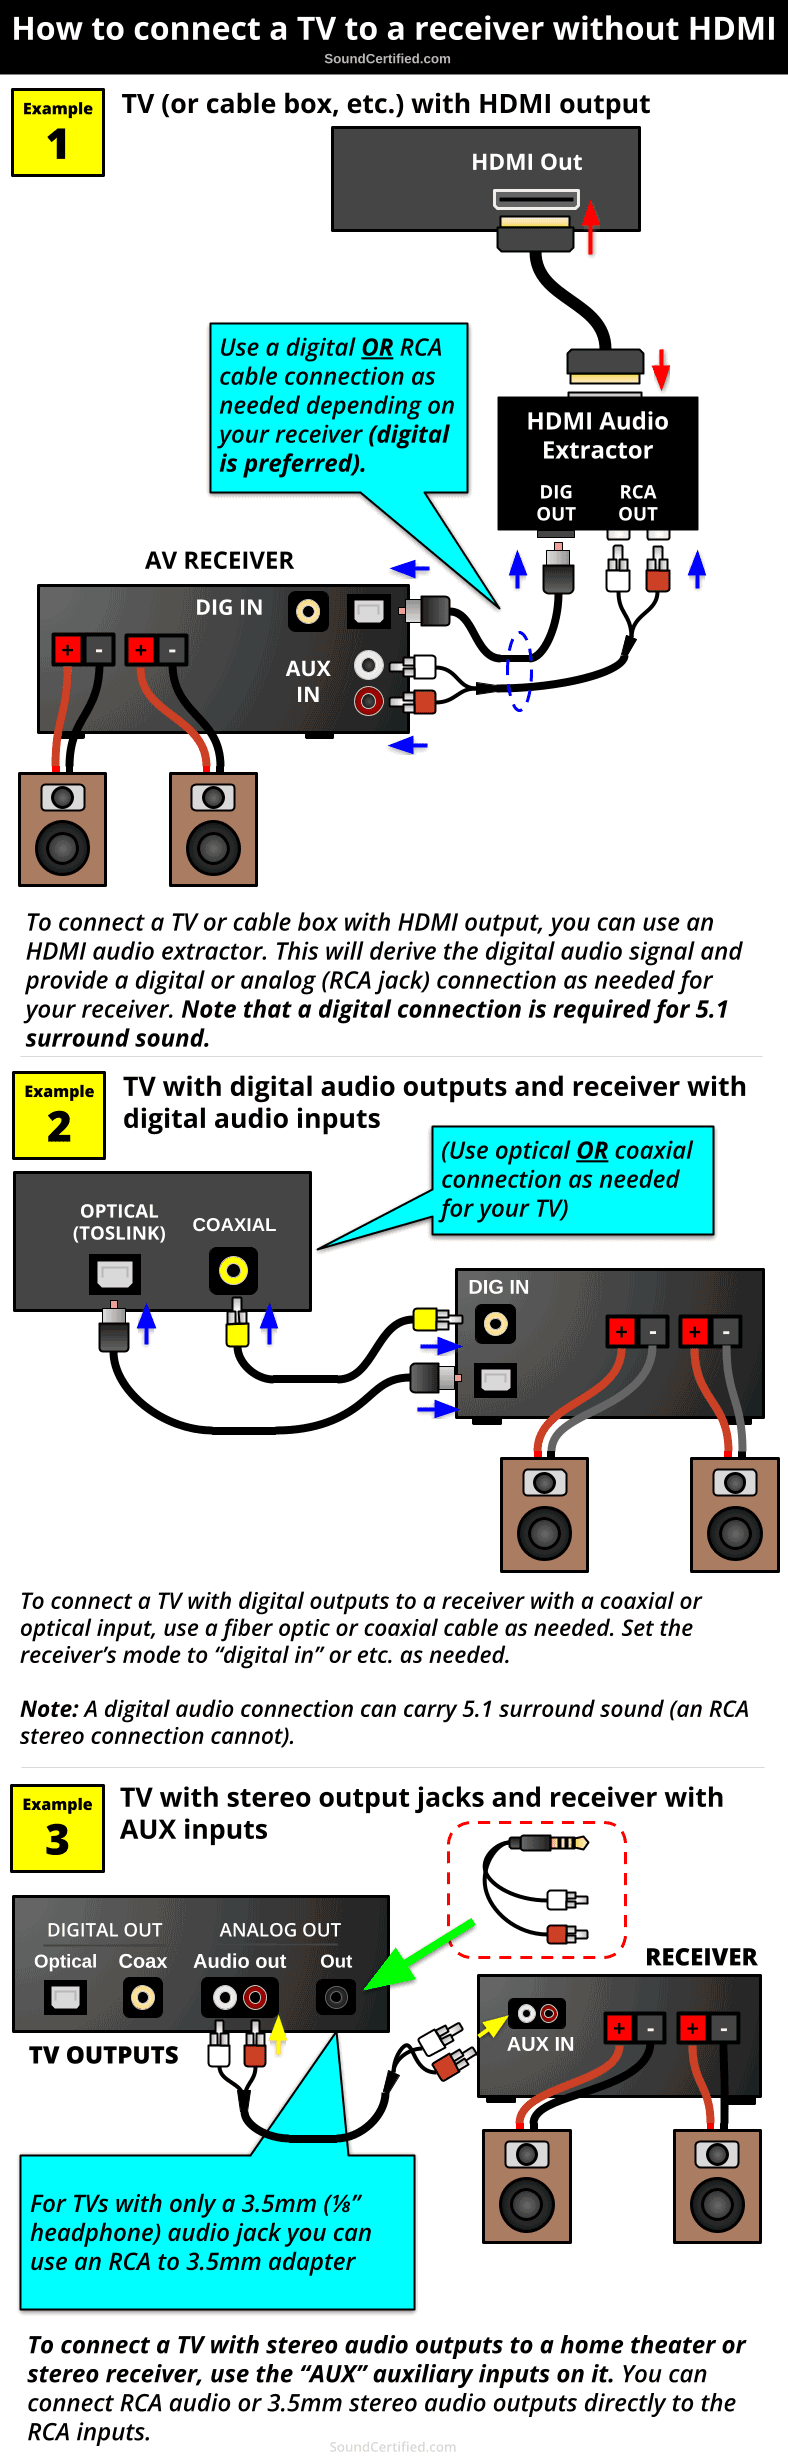 How To Connect A TV To A Home Receiver Without HDMI - Guide & Diagrams